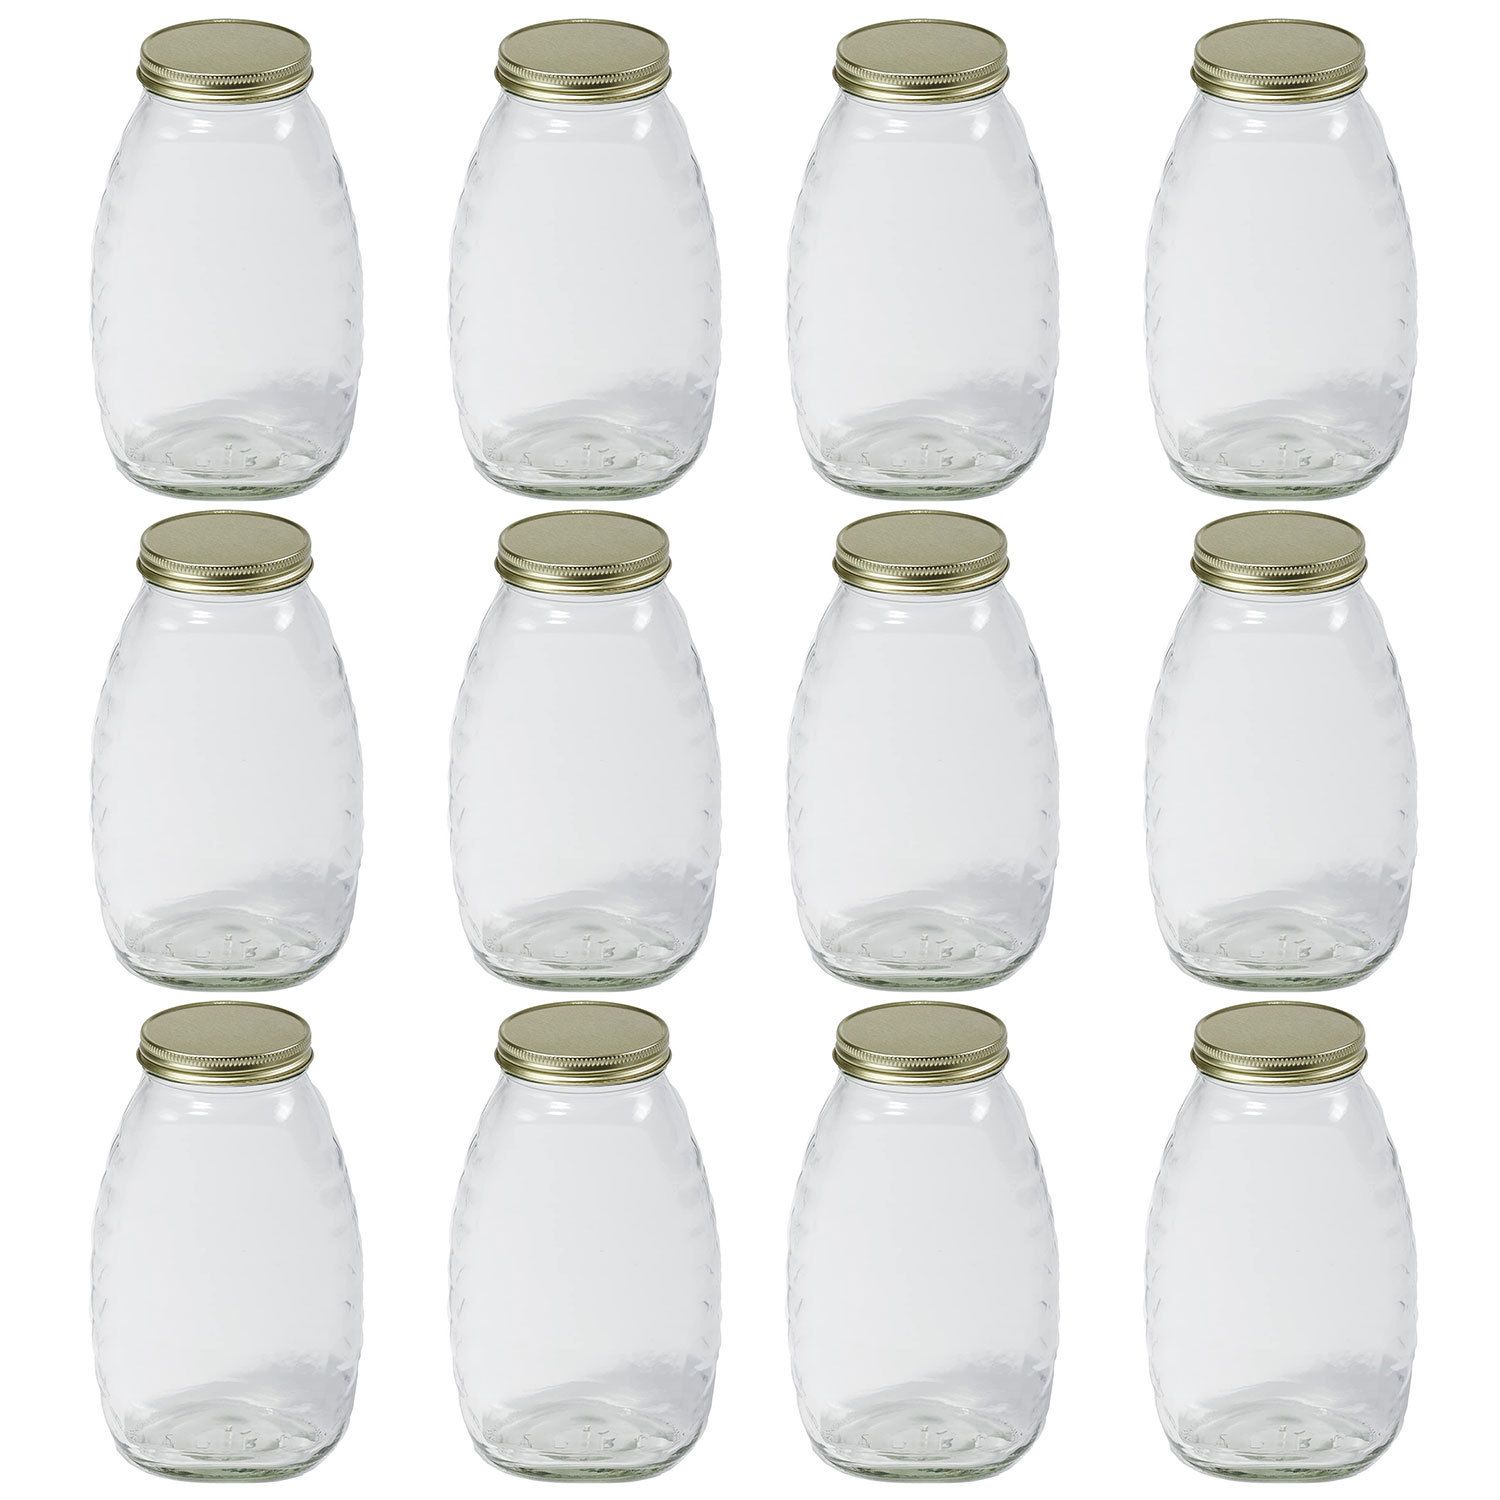 mDesign Glass Storage Apothecary Jar for Bathroom Vanity, 3 Pack